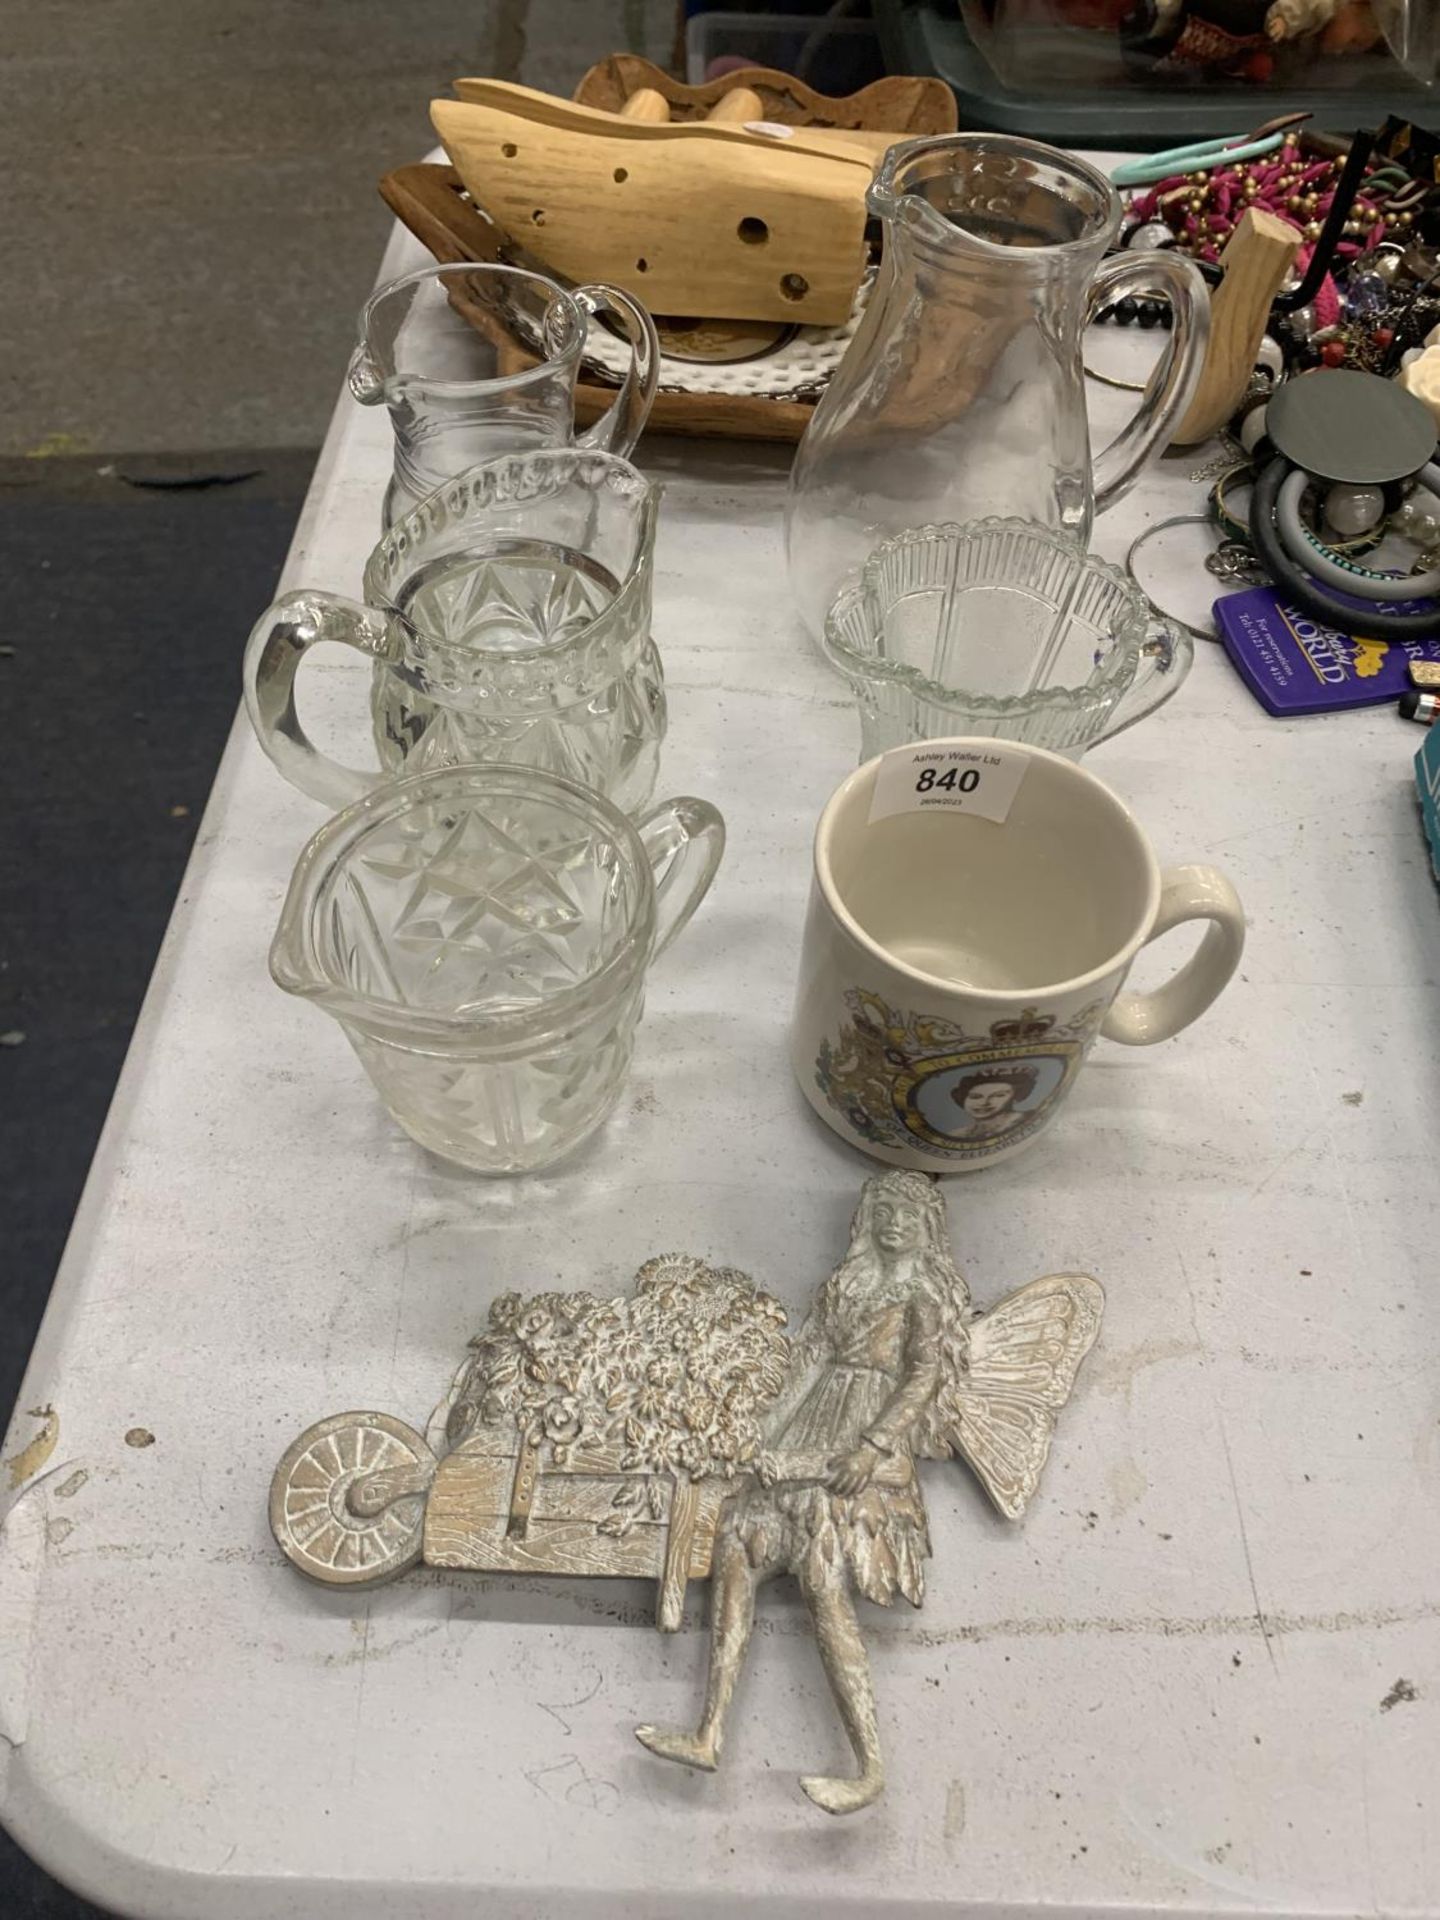 A MIXED LOT TO INCLUDE VINTAGE GLASS JUGS, A SMALL FAIRY WALL PLAQUE, A CORKSCREW, ETC